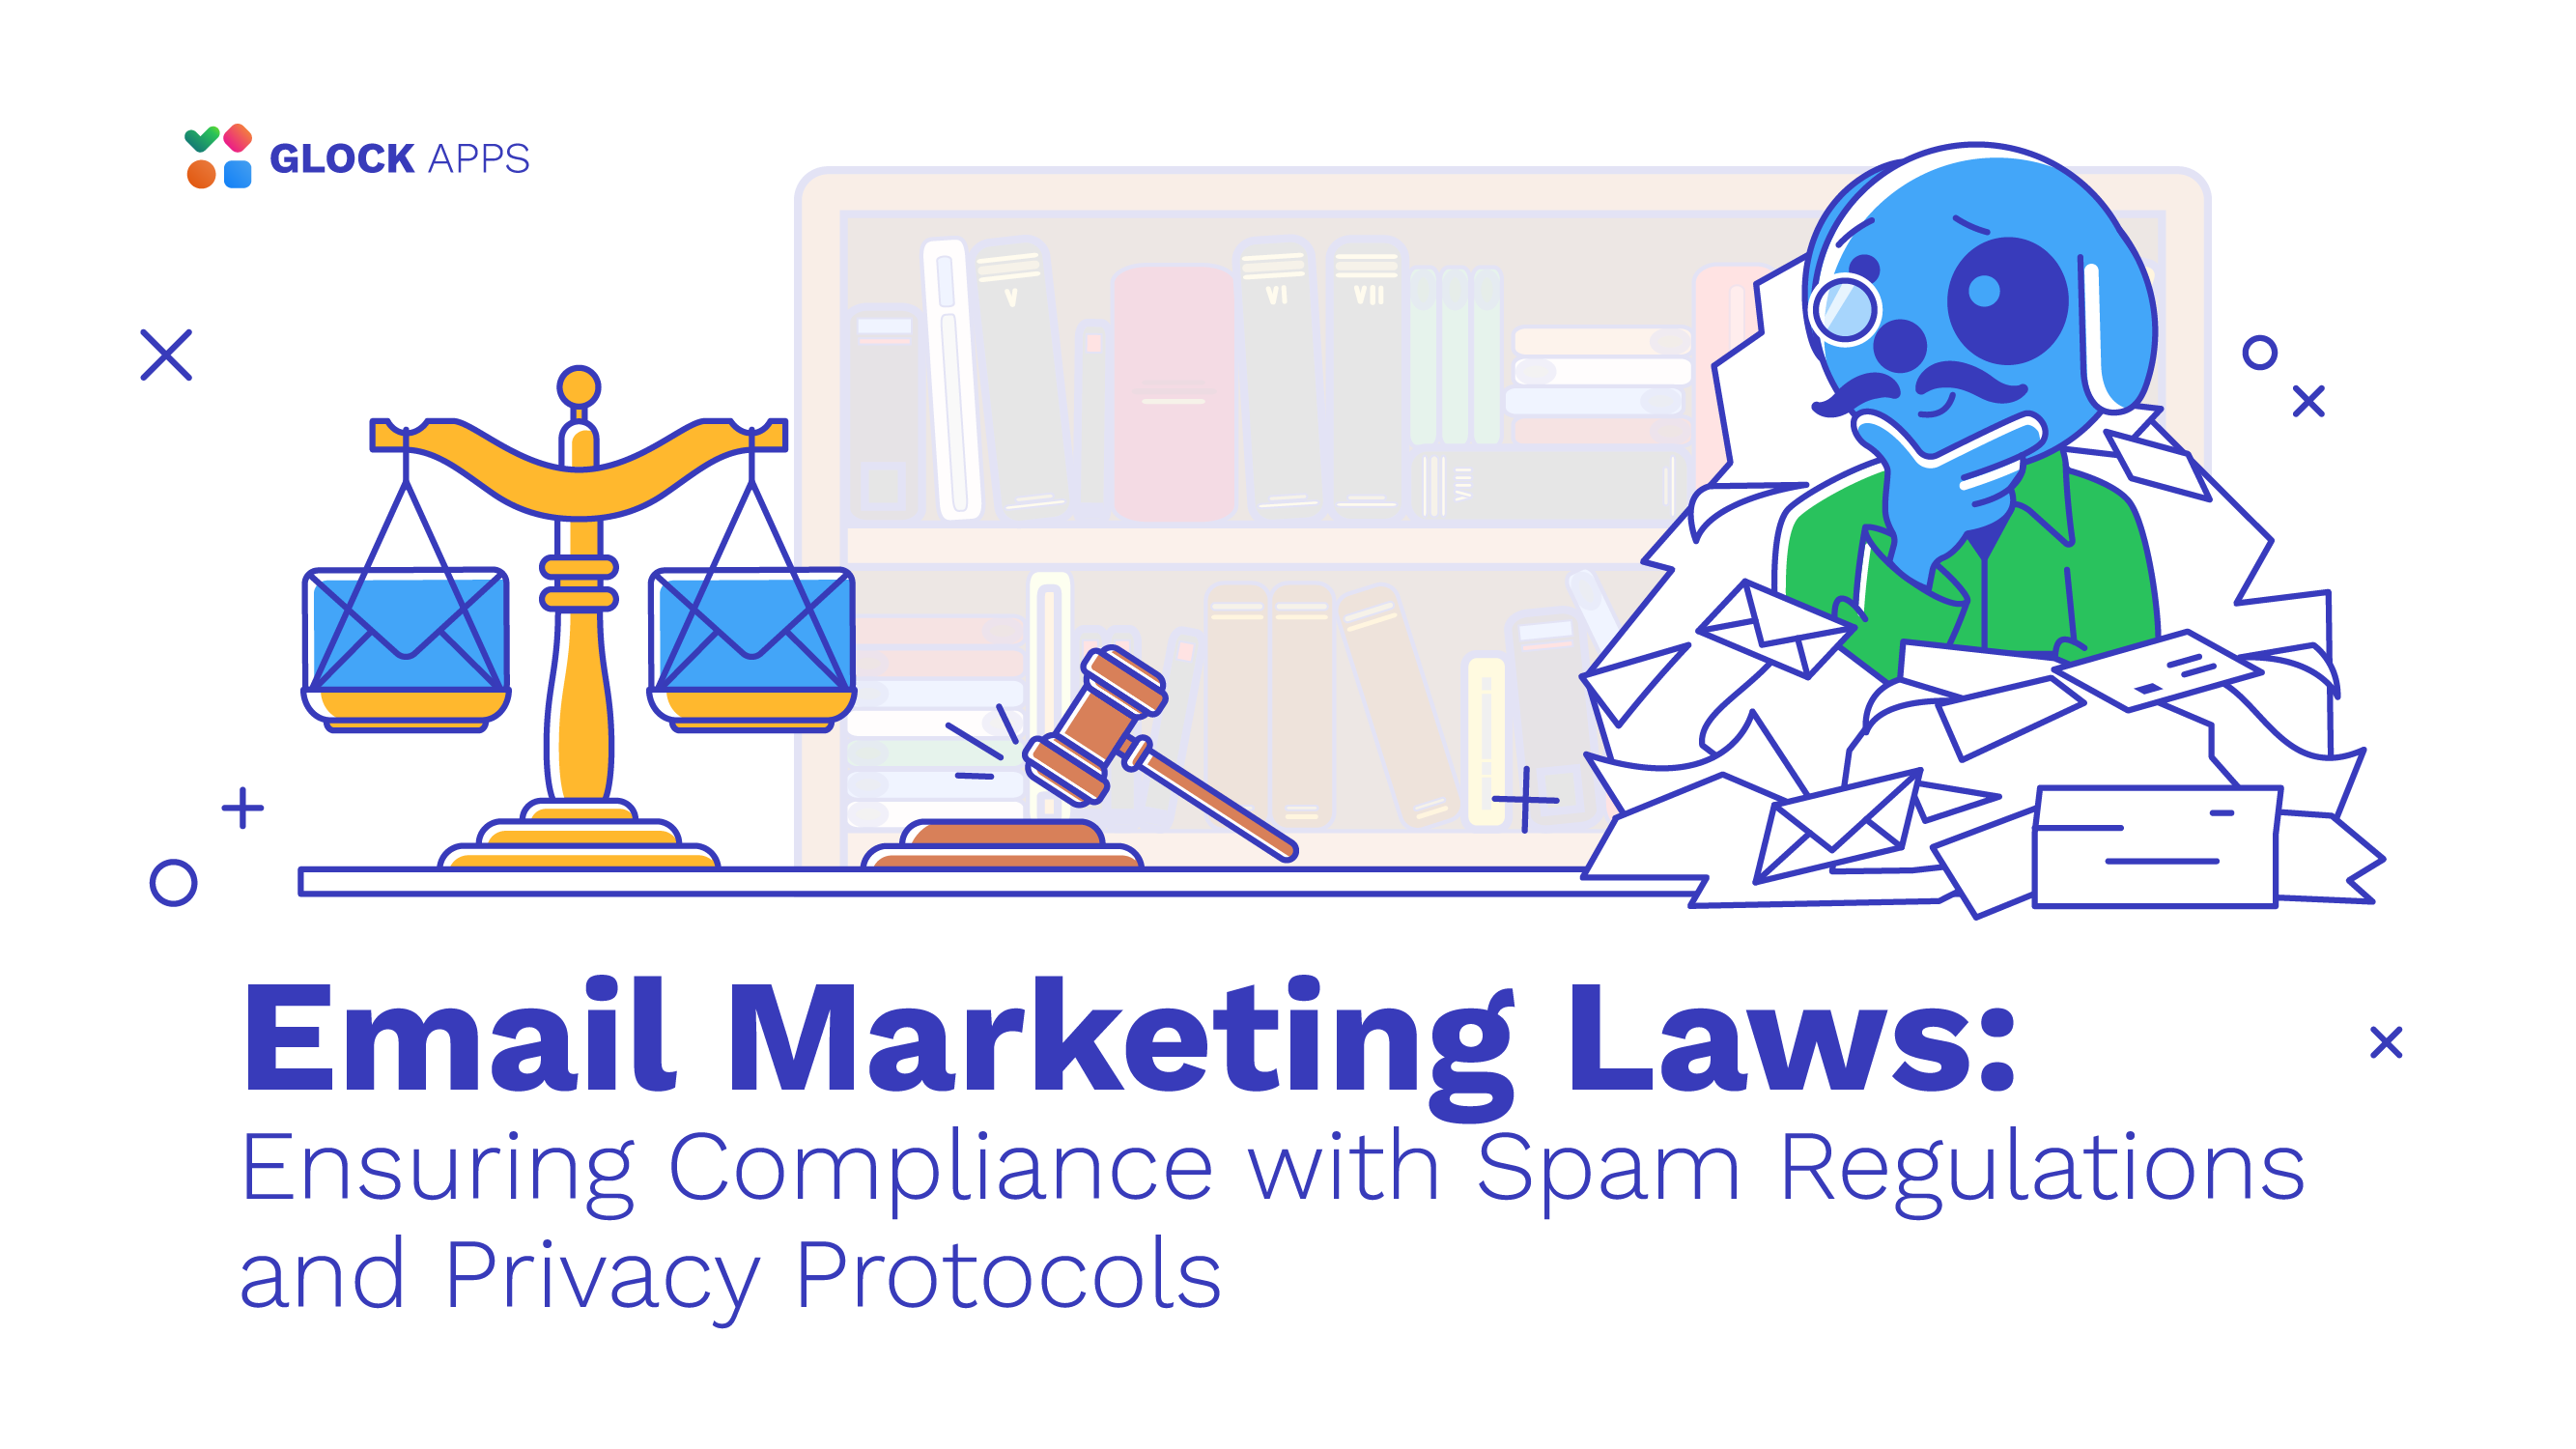 glockapps:-email-marketing-laws:-ensuring-compliance-with-spam-regulations-and-privacy-protocols